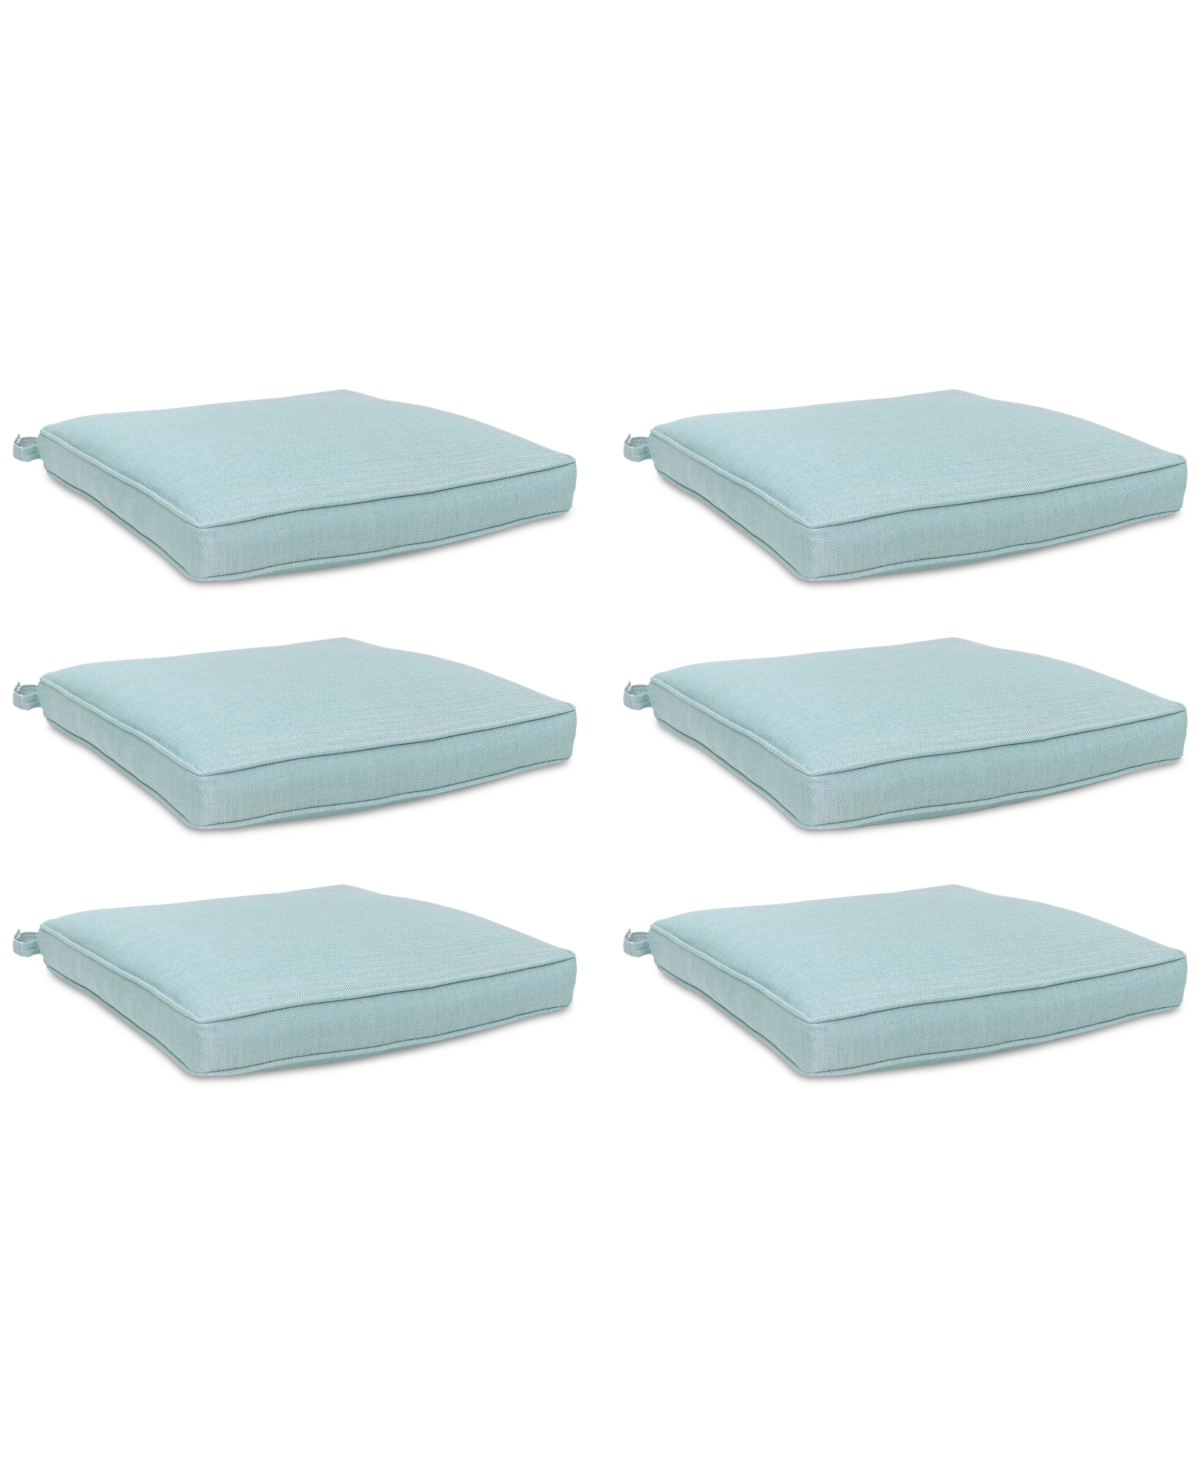 Agio Replacement Outdoor Dining Cushion, Set Of 6 In Spa Light Blue